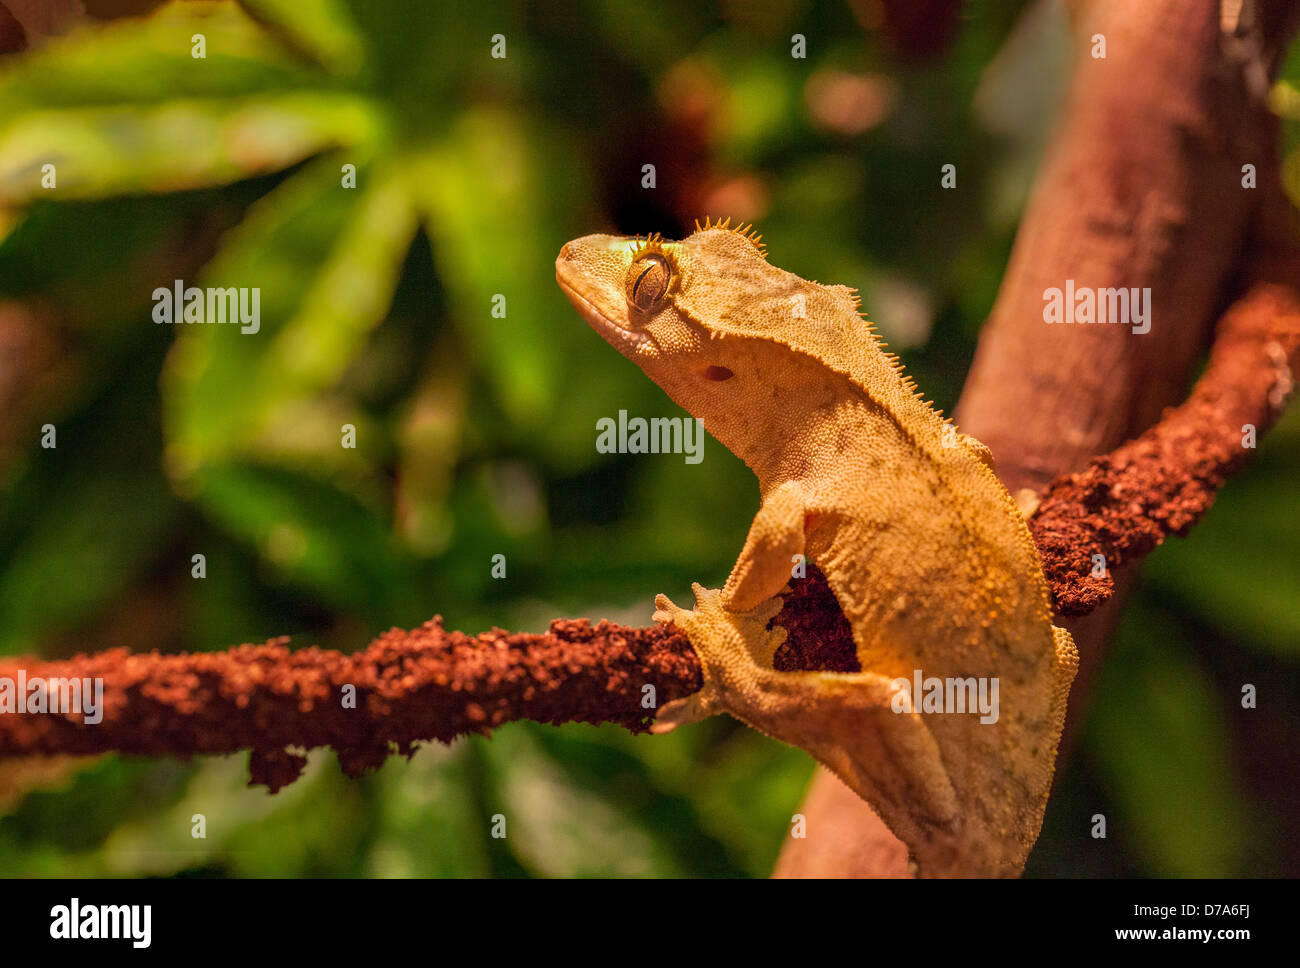 Crested Gecko, also known as Eyelash Gecko, New Caledonian Gecko Stock Photo